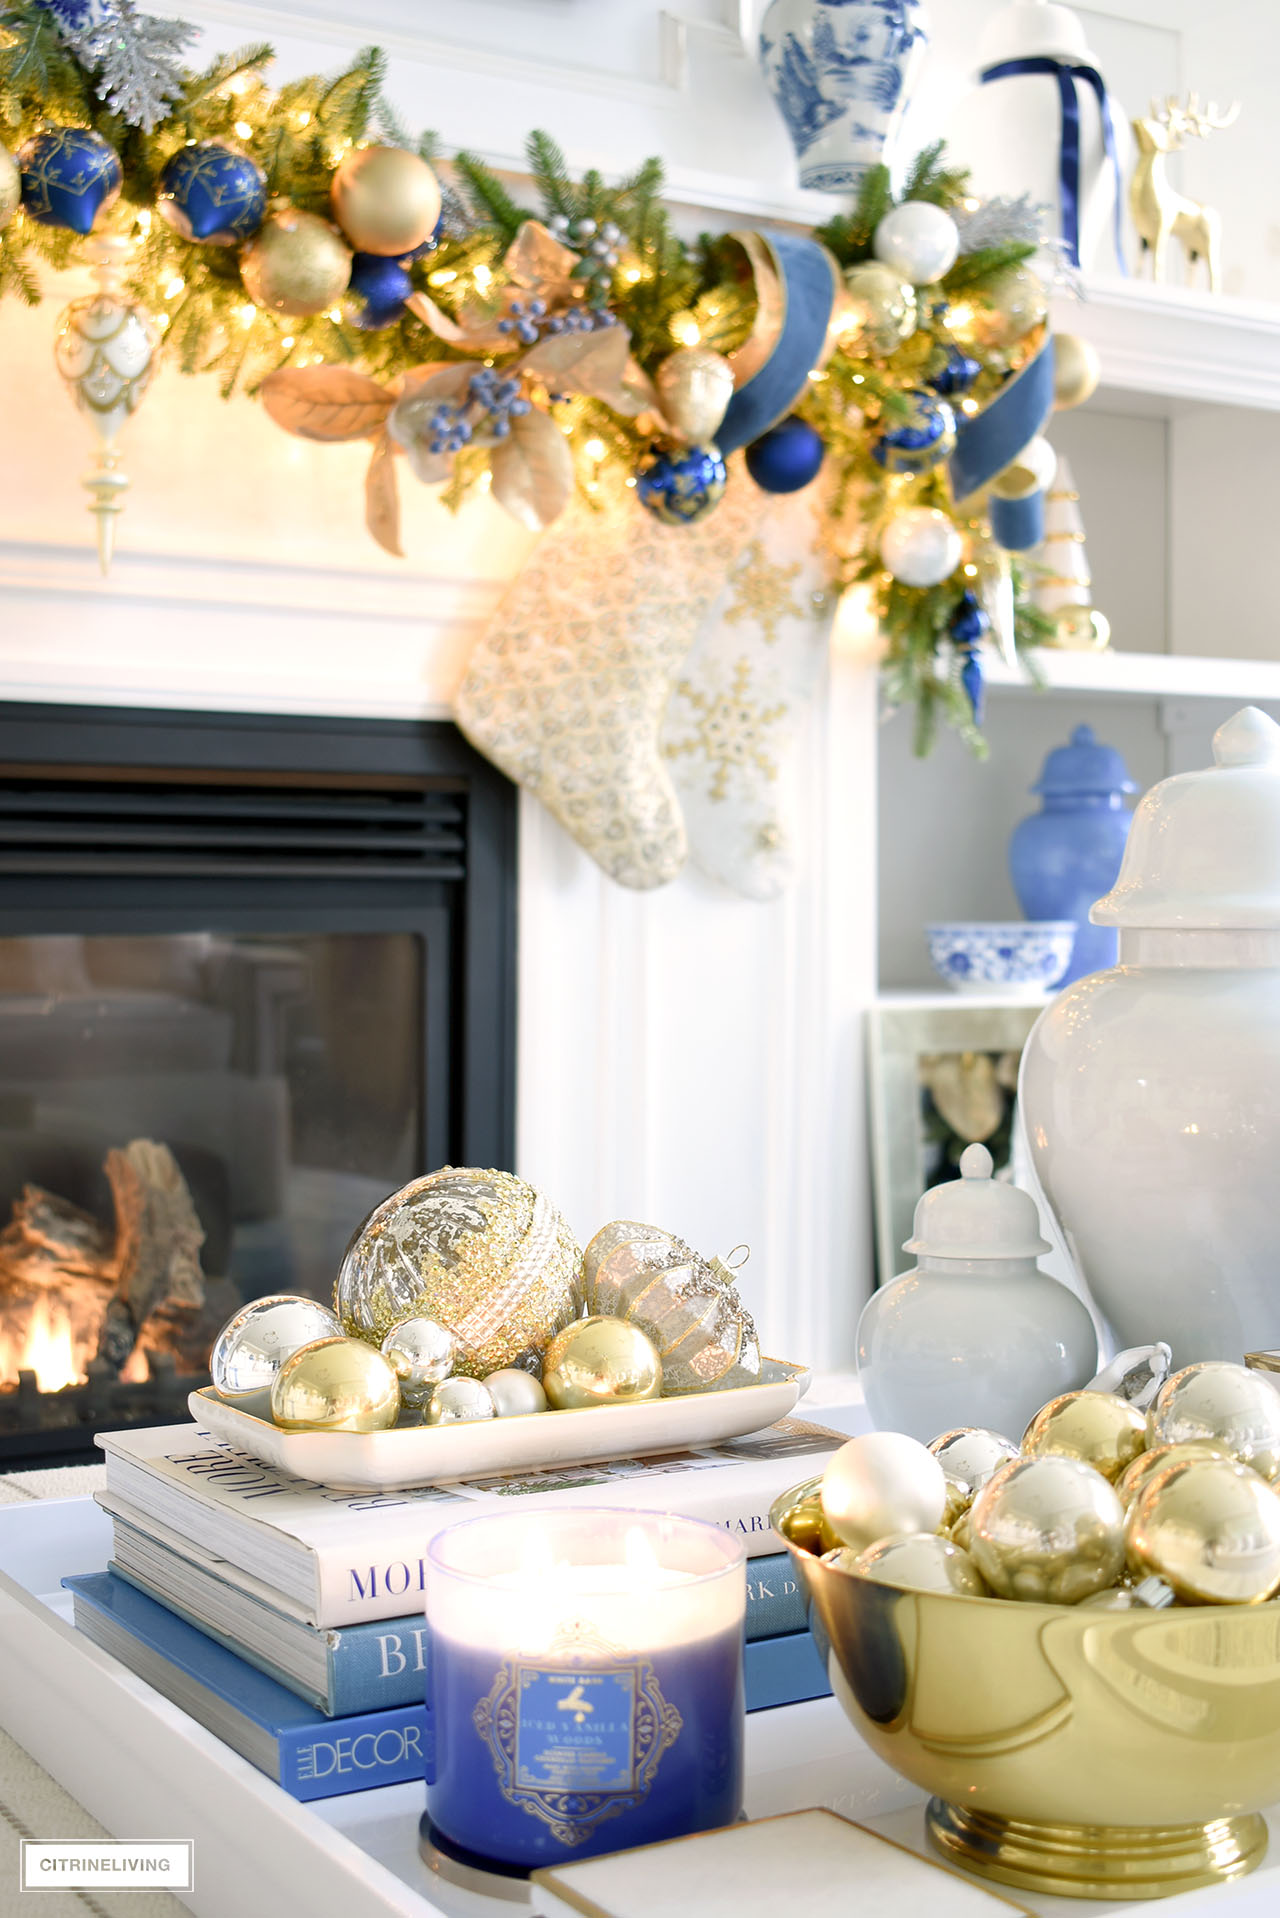 Living room ottoman styled for christmas - a gold bowl and a ceramic tray with silver and gold ornaments, scented candle and ginger jars.